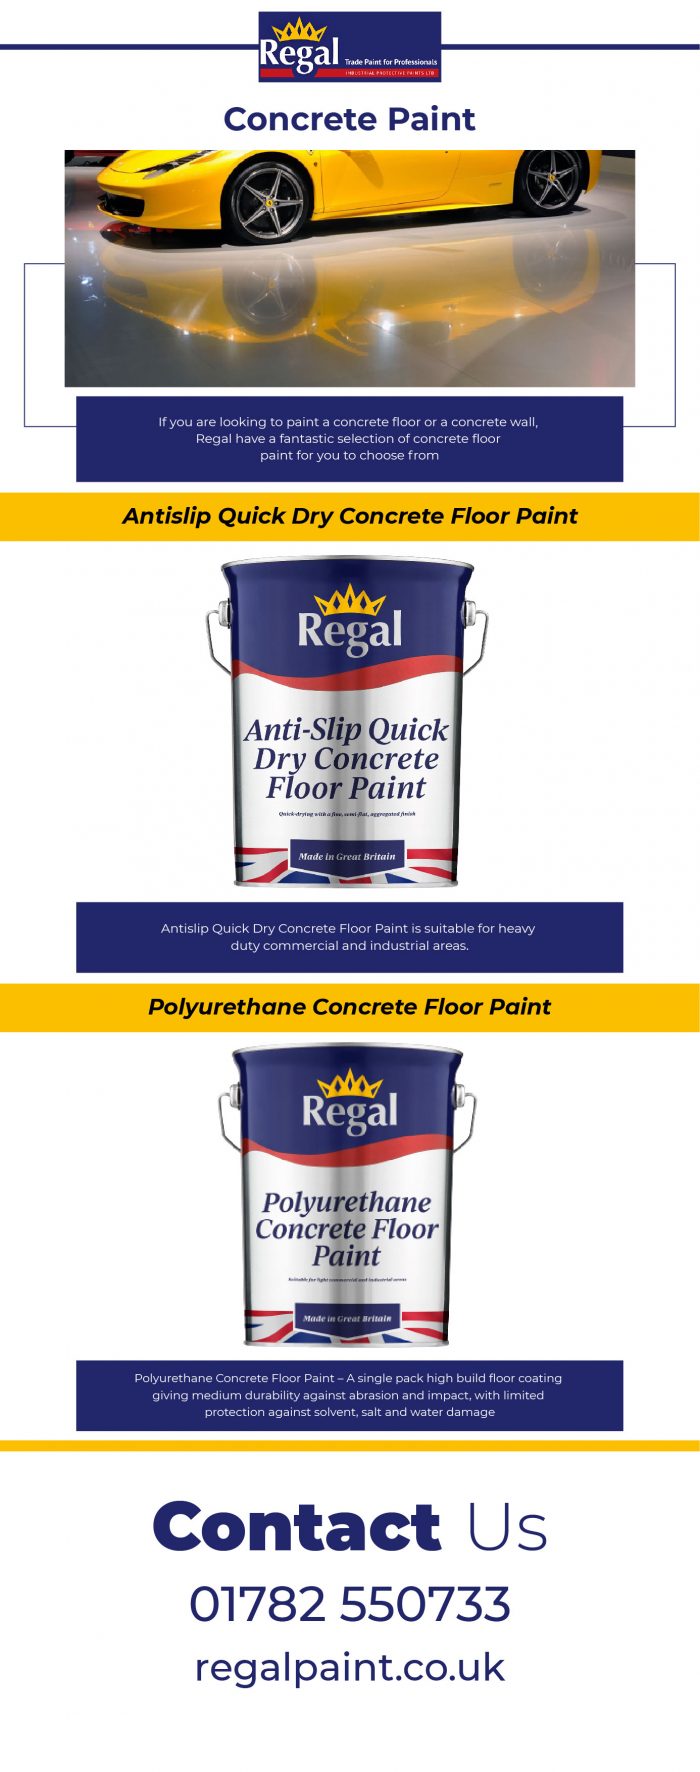 Buy Concrete Paint at The Best Price Offer